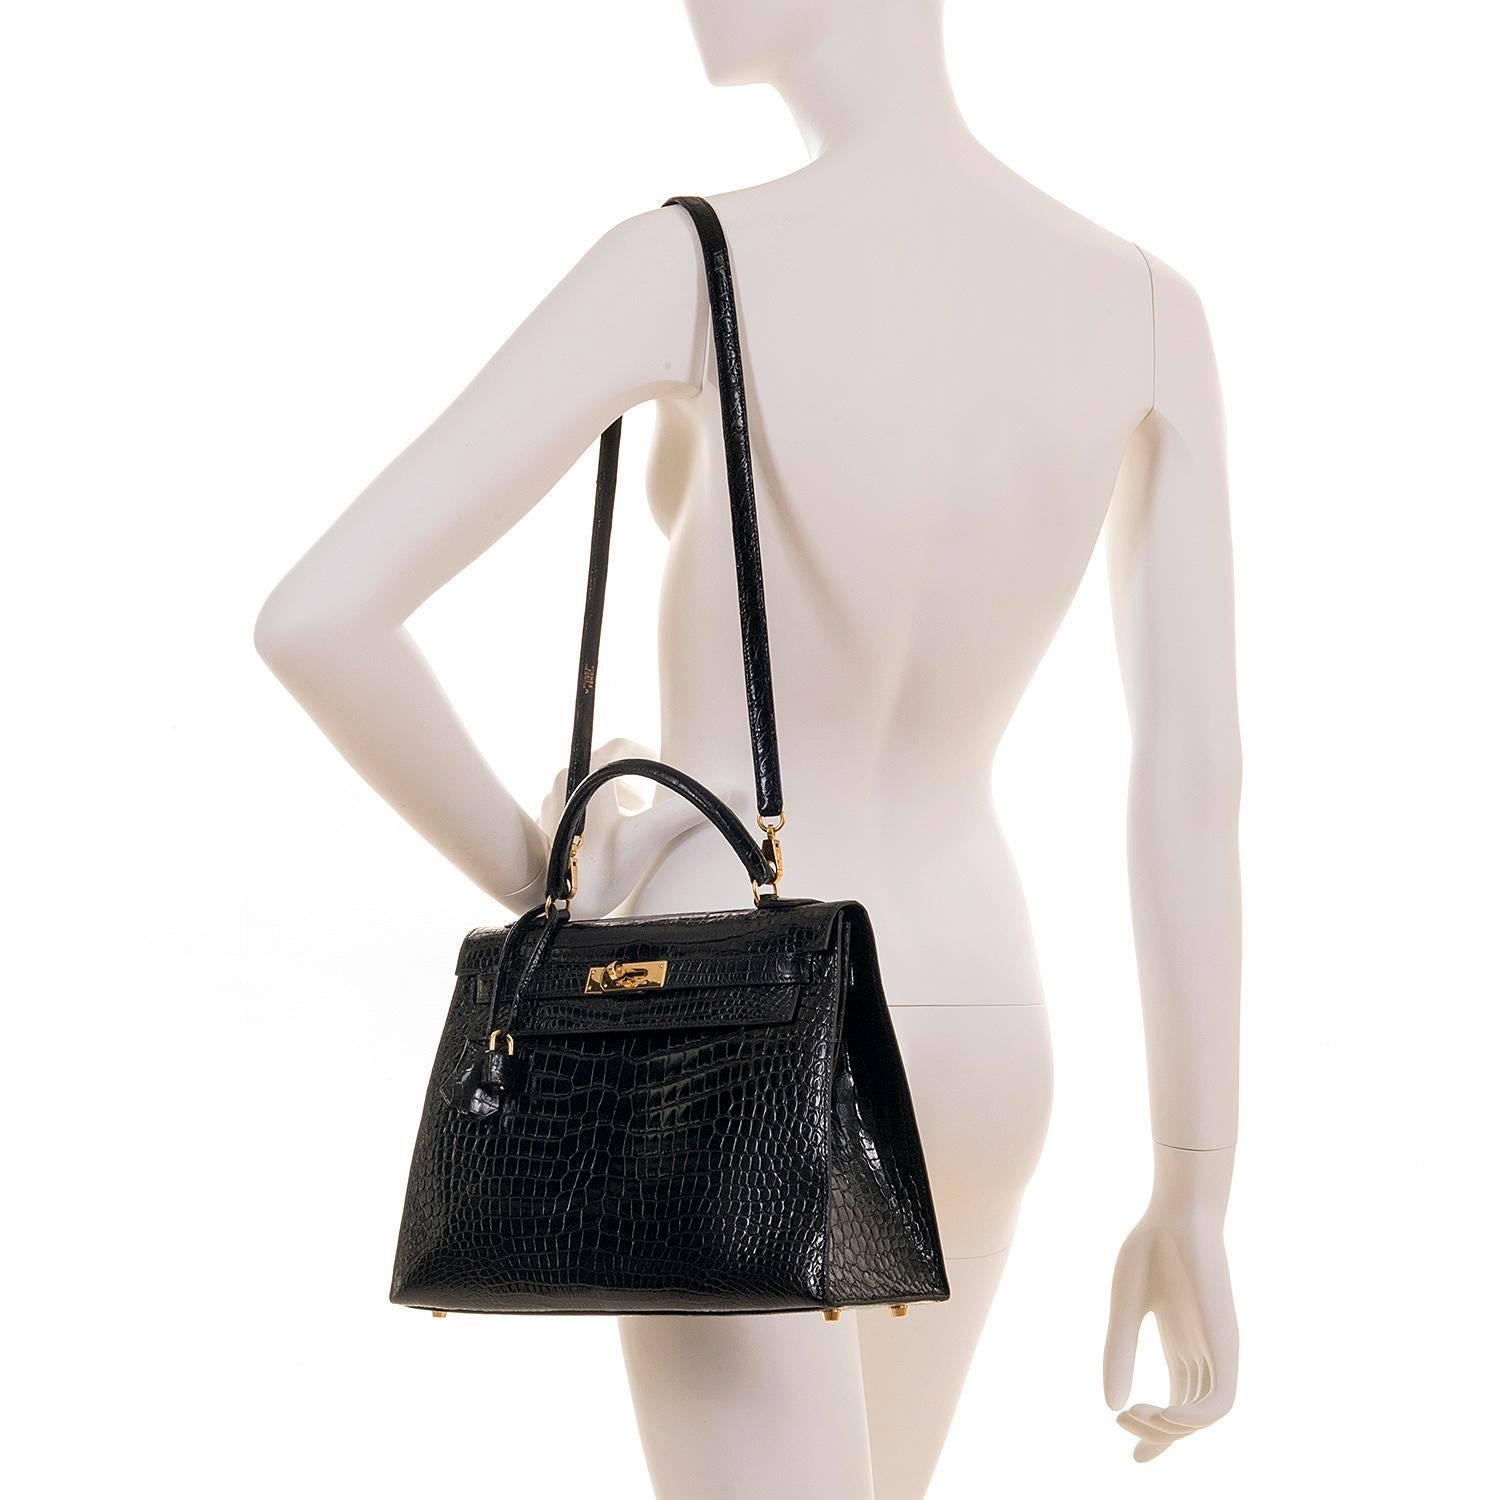 AS NEW Hermes 32cm Black Porous Crocodile Kelly Bag with Gold Hardware 5